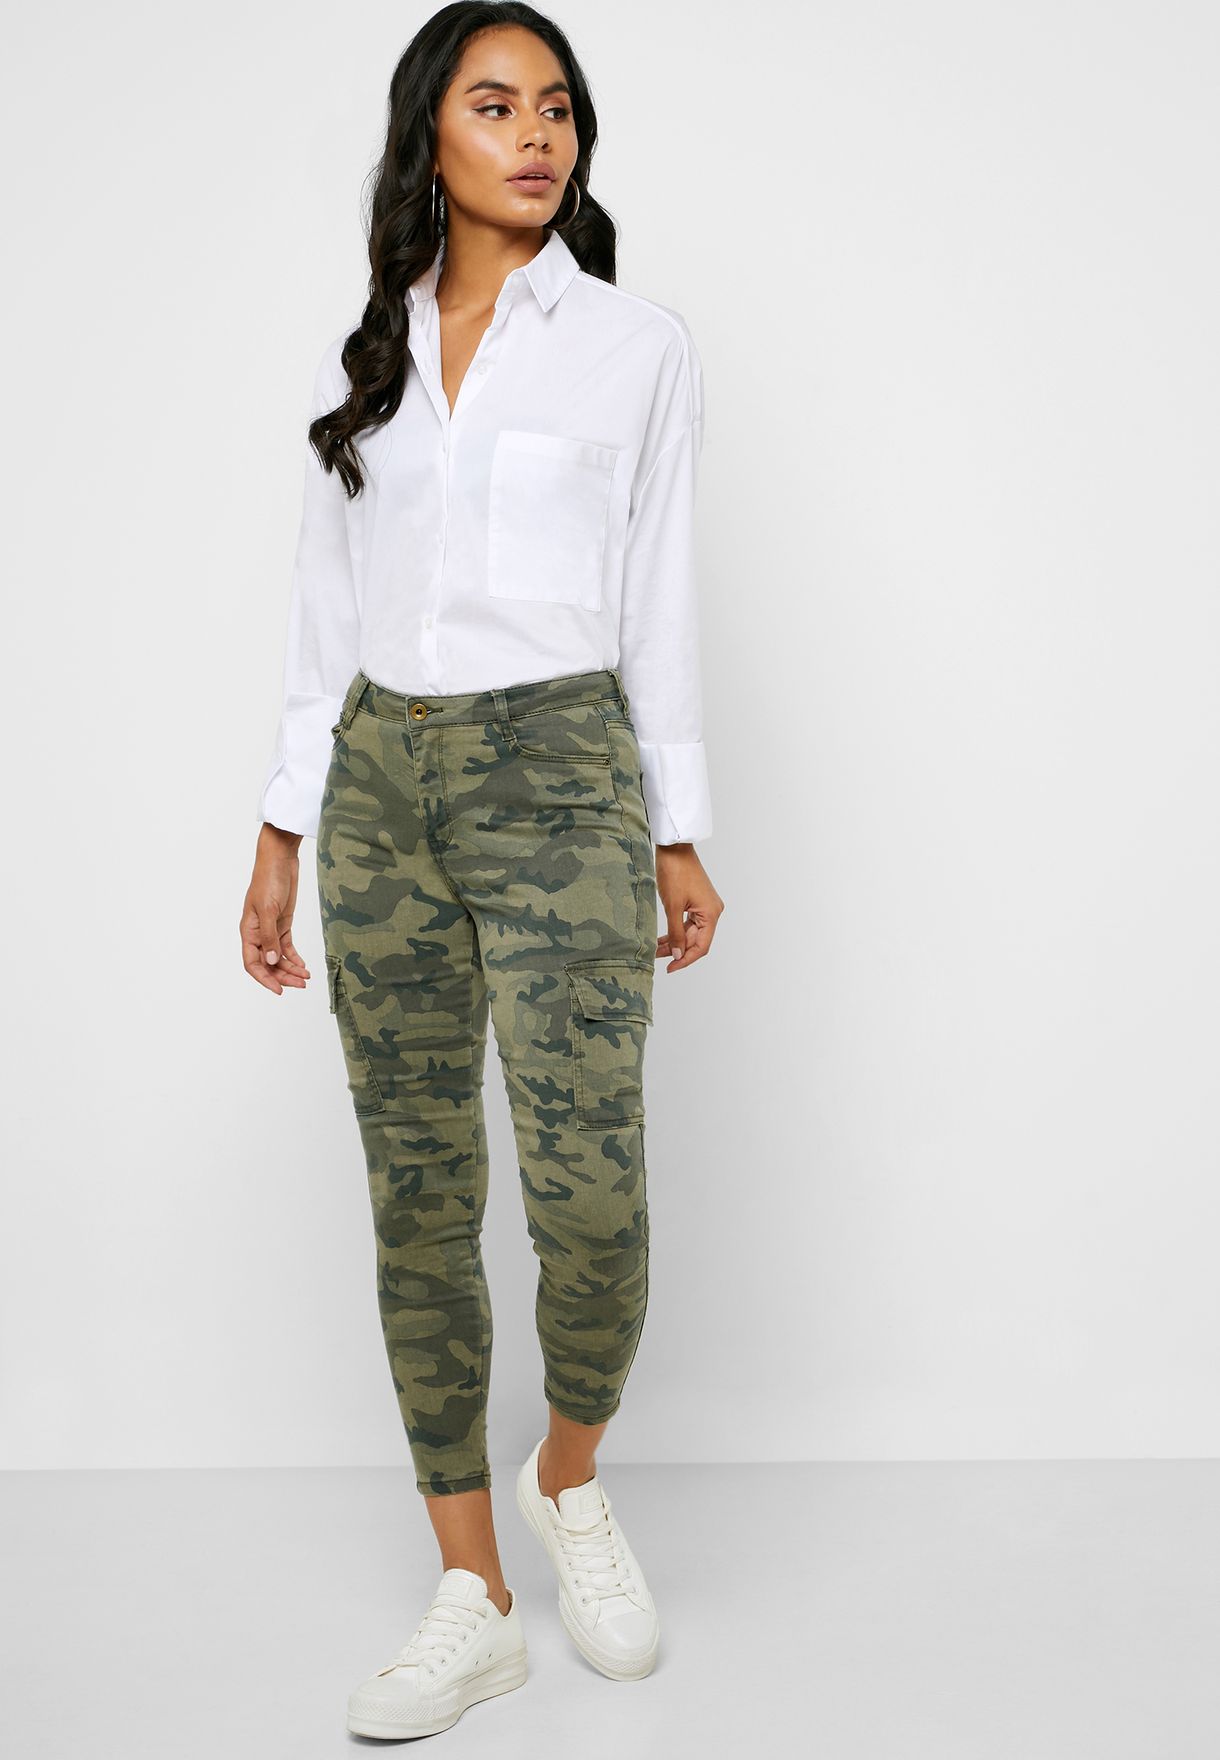 camouflage print jeans